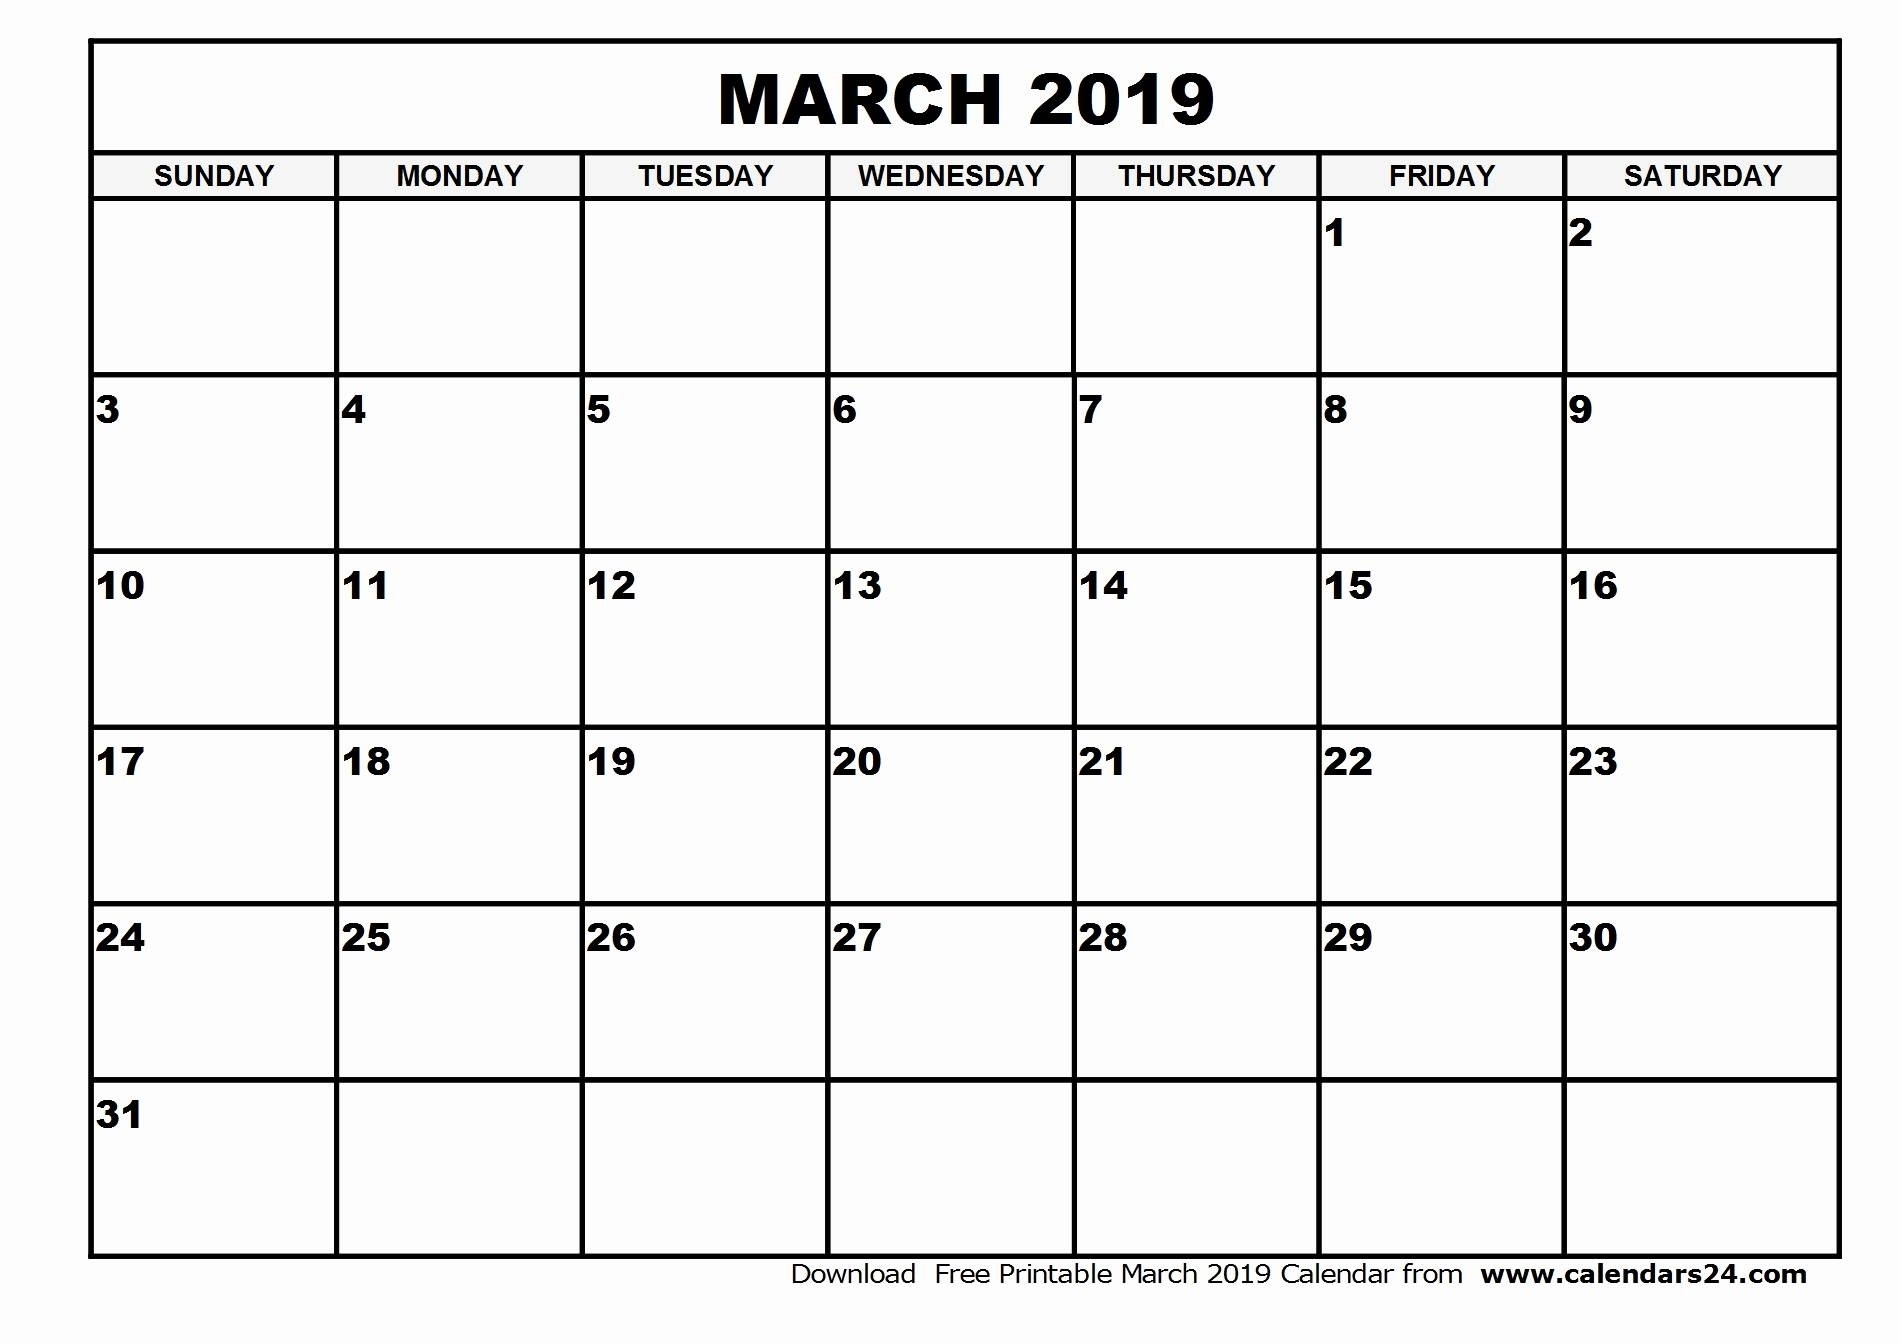 Blank March 2019 Calendar Templates Printable Download - July 2019 intended for Free Printable Month By Month Calendars